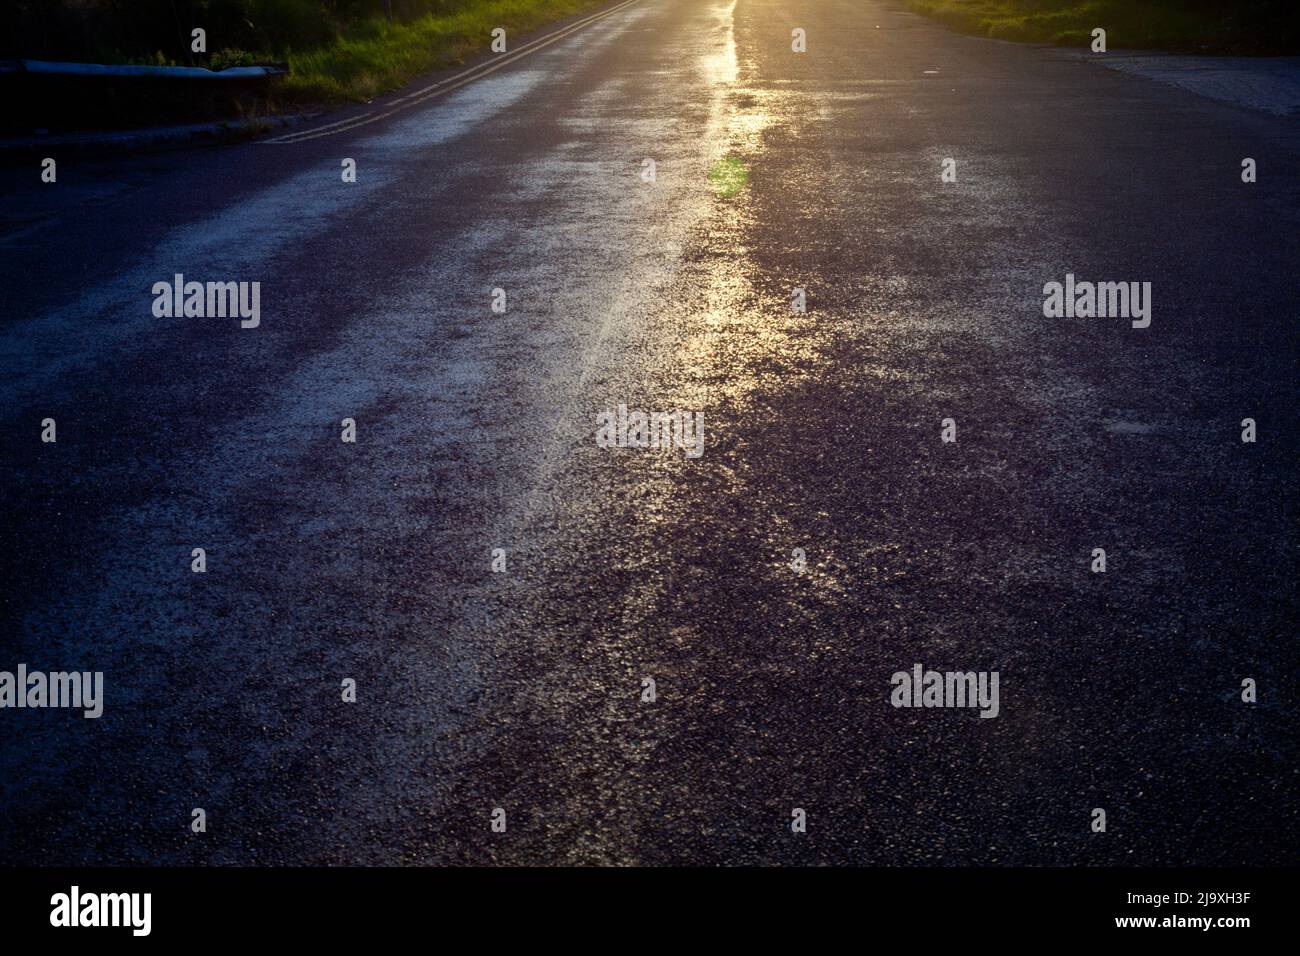 abstract photograph using a long exposure and filter looking into the  strong summer sunlight shining brightly down a road Stock Photo